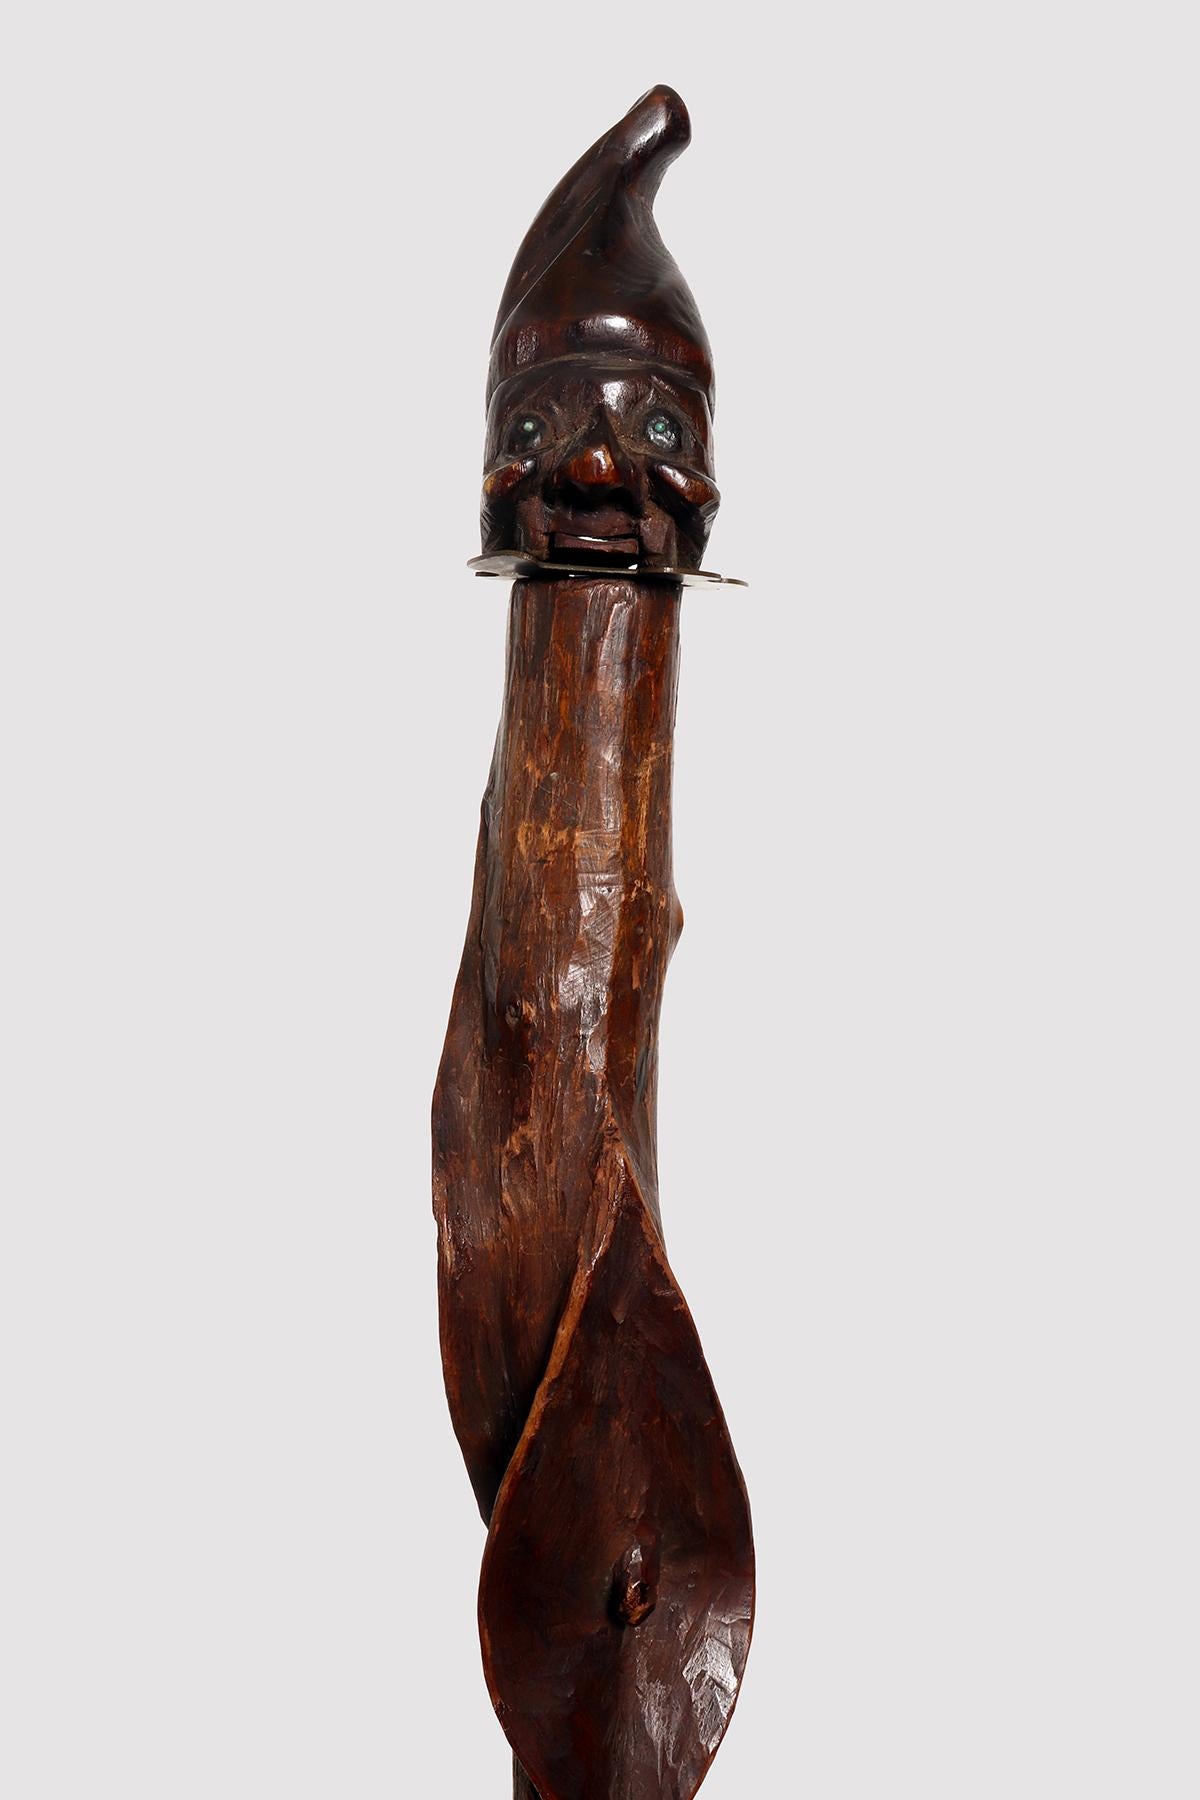 Walking stick system, folk art made from a carved, patinated and waxed fruit wood. Large leaves unfold along the entire stem. The handle is a man's head with a hat, separated from the barrel by a metal plate. A lever placed at the base of the neck